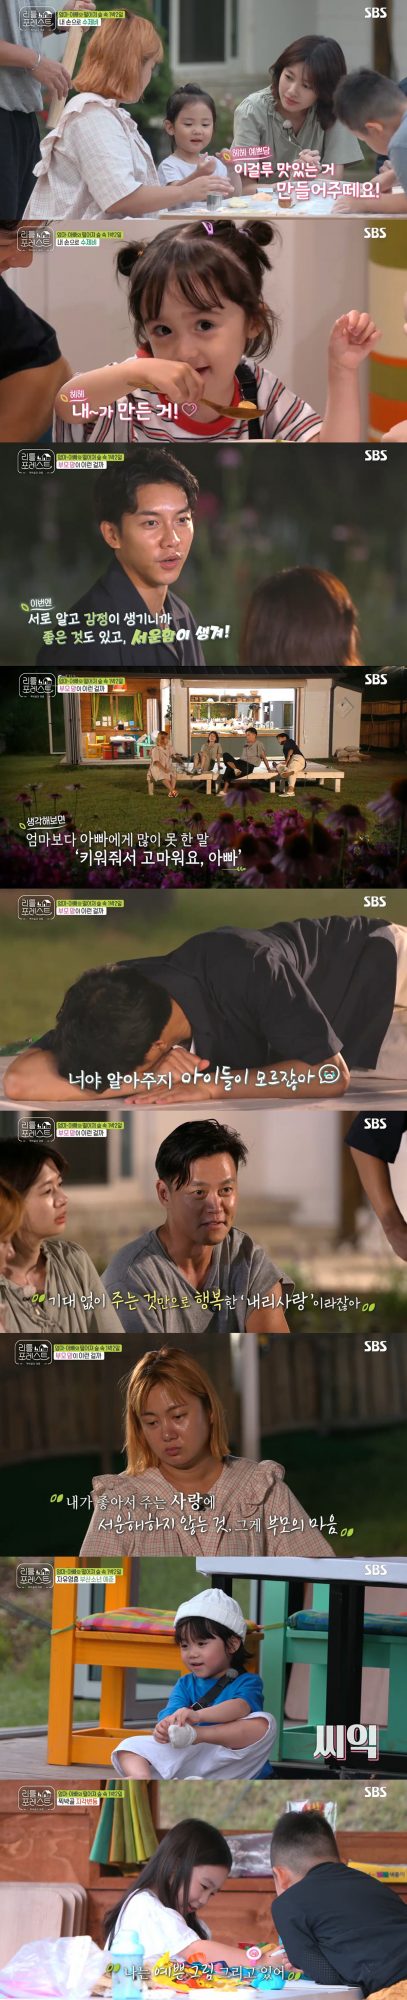 In Little Forest, which aired on the last three days, a second farewell to Little and a third meeting with two new friends were drawn.After a dip in the valley, Lee Hyun, Brooke, and Grace fell asleep, and Jeong Han, Lee Han, had a romantic time talking about rising up with Uncle Seung-gi and the sky.Lee Seung-gi said, I think of a bean biscuit stew. Jung Han said, Popcorn comes up, and Lee Han said, It is like Dracula.Lee Seo-jin used the remaining white broth to prepare Sujebi for dinner menu; Littles shared the Sujebi debt.Littles were interested in the strange touch and made hearts and star-shaped Sujebi, which was more delicious to the pride of the Sujebi of deep chicken soup and the Littles made it themselves.But Lee, who had not been able to eat as usual, got up first at the table.The second breakup time came with Little. Littles went back to their parents and the members talked.Lee Seung-gi said, I know each other and have feelings with my children, so I have good things, but I feel sorry. I thought I did not know my mind.Lee Seo-jin said, Children are love, and I do not want to be sad because I like it.The third meeting day at the Tjakbukol was followed. In the third meeting, four-year-old Busan boy Yejuni and six-year-old Gaoni joined.As soon as Ye Jun came, he took off his socks and walked around the ball and showed a free soul.Another new Friend Gaon boasted of his eldest sisters brilliance, such as a lively greeting to the camera and running around after a flying butterfly.When Lee met the new Friend Gaon, he gave his name to him and played with him. The members said, Ihan was heartbroken to Gaon in Brook.Im so in love with you. Brooke appeared, and I wondered how the triangular relationship between the three little girls who had fallen alone would lead.Little Forest is broadcast every Monday and Tuesday at 10 pm.